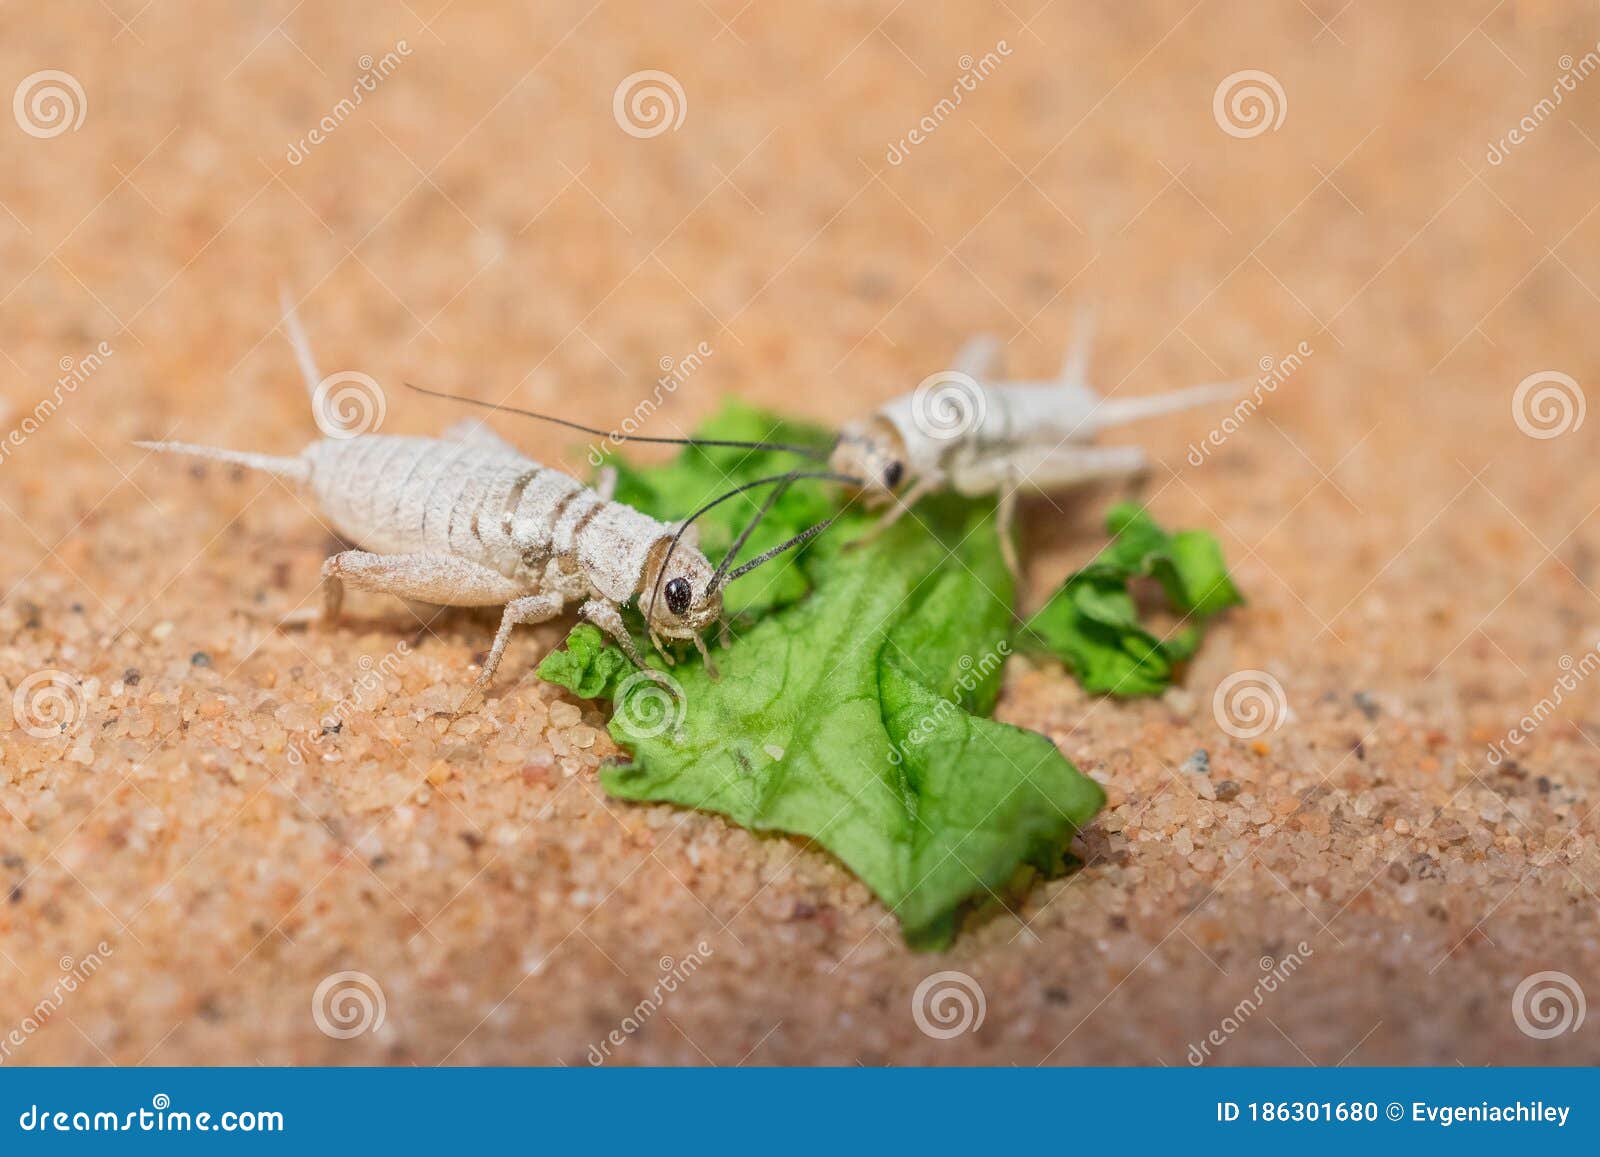 Live Crickets in White Calcium Eating a Leaf of Salad on Sand. Cricket in  Terrarium. Feeder Insect. Acheta Domesticus Species Stock Photo - Image of  horns, brown: 186301680